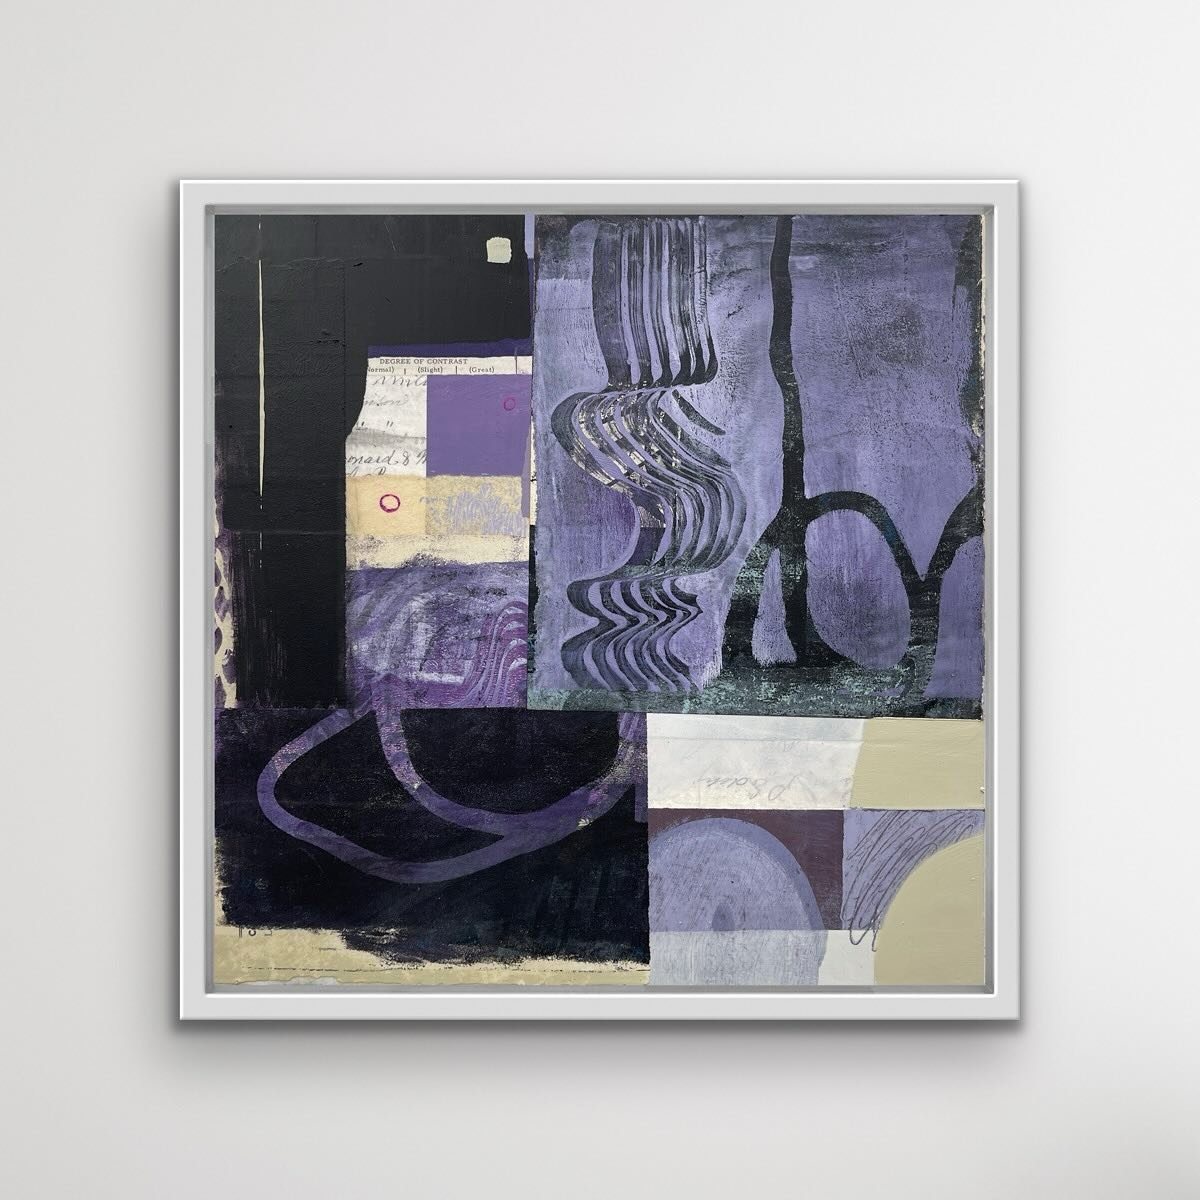 12&rdquo;x12&rdquo; acrylic, collage, and mixed mediums on panel hanging out on the studio wall.

#art #abstract #contemporaryabstract #smallpaintings #deborahtcolter #purplelove